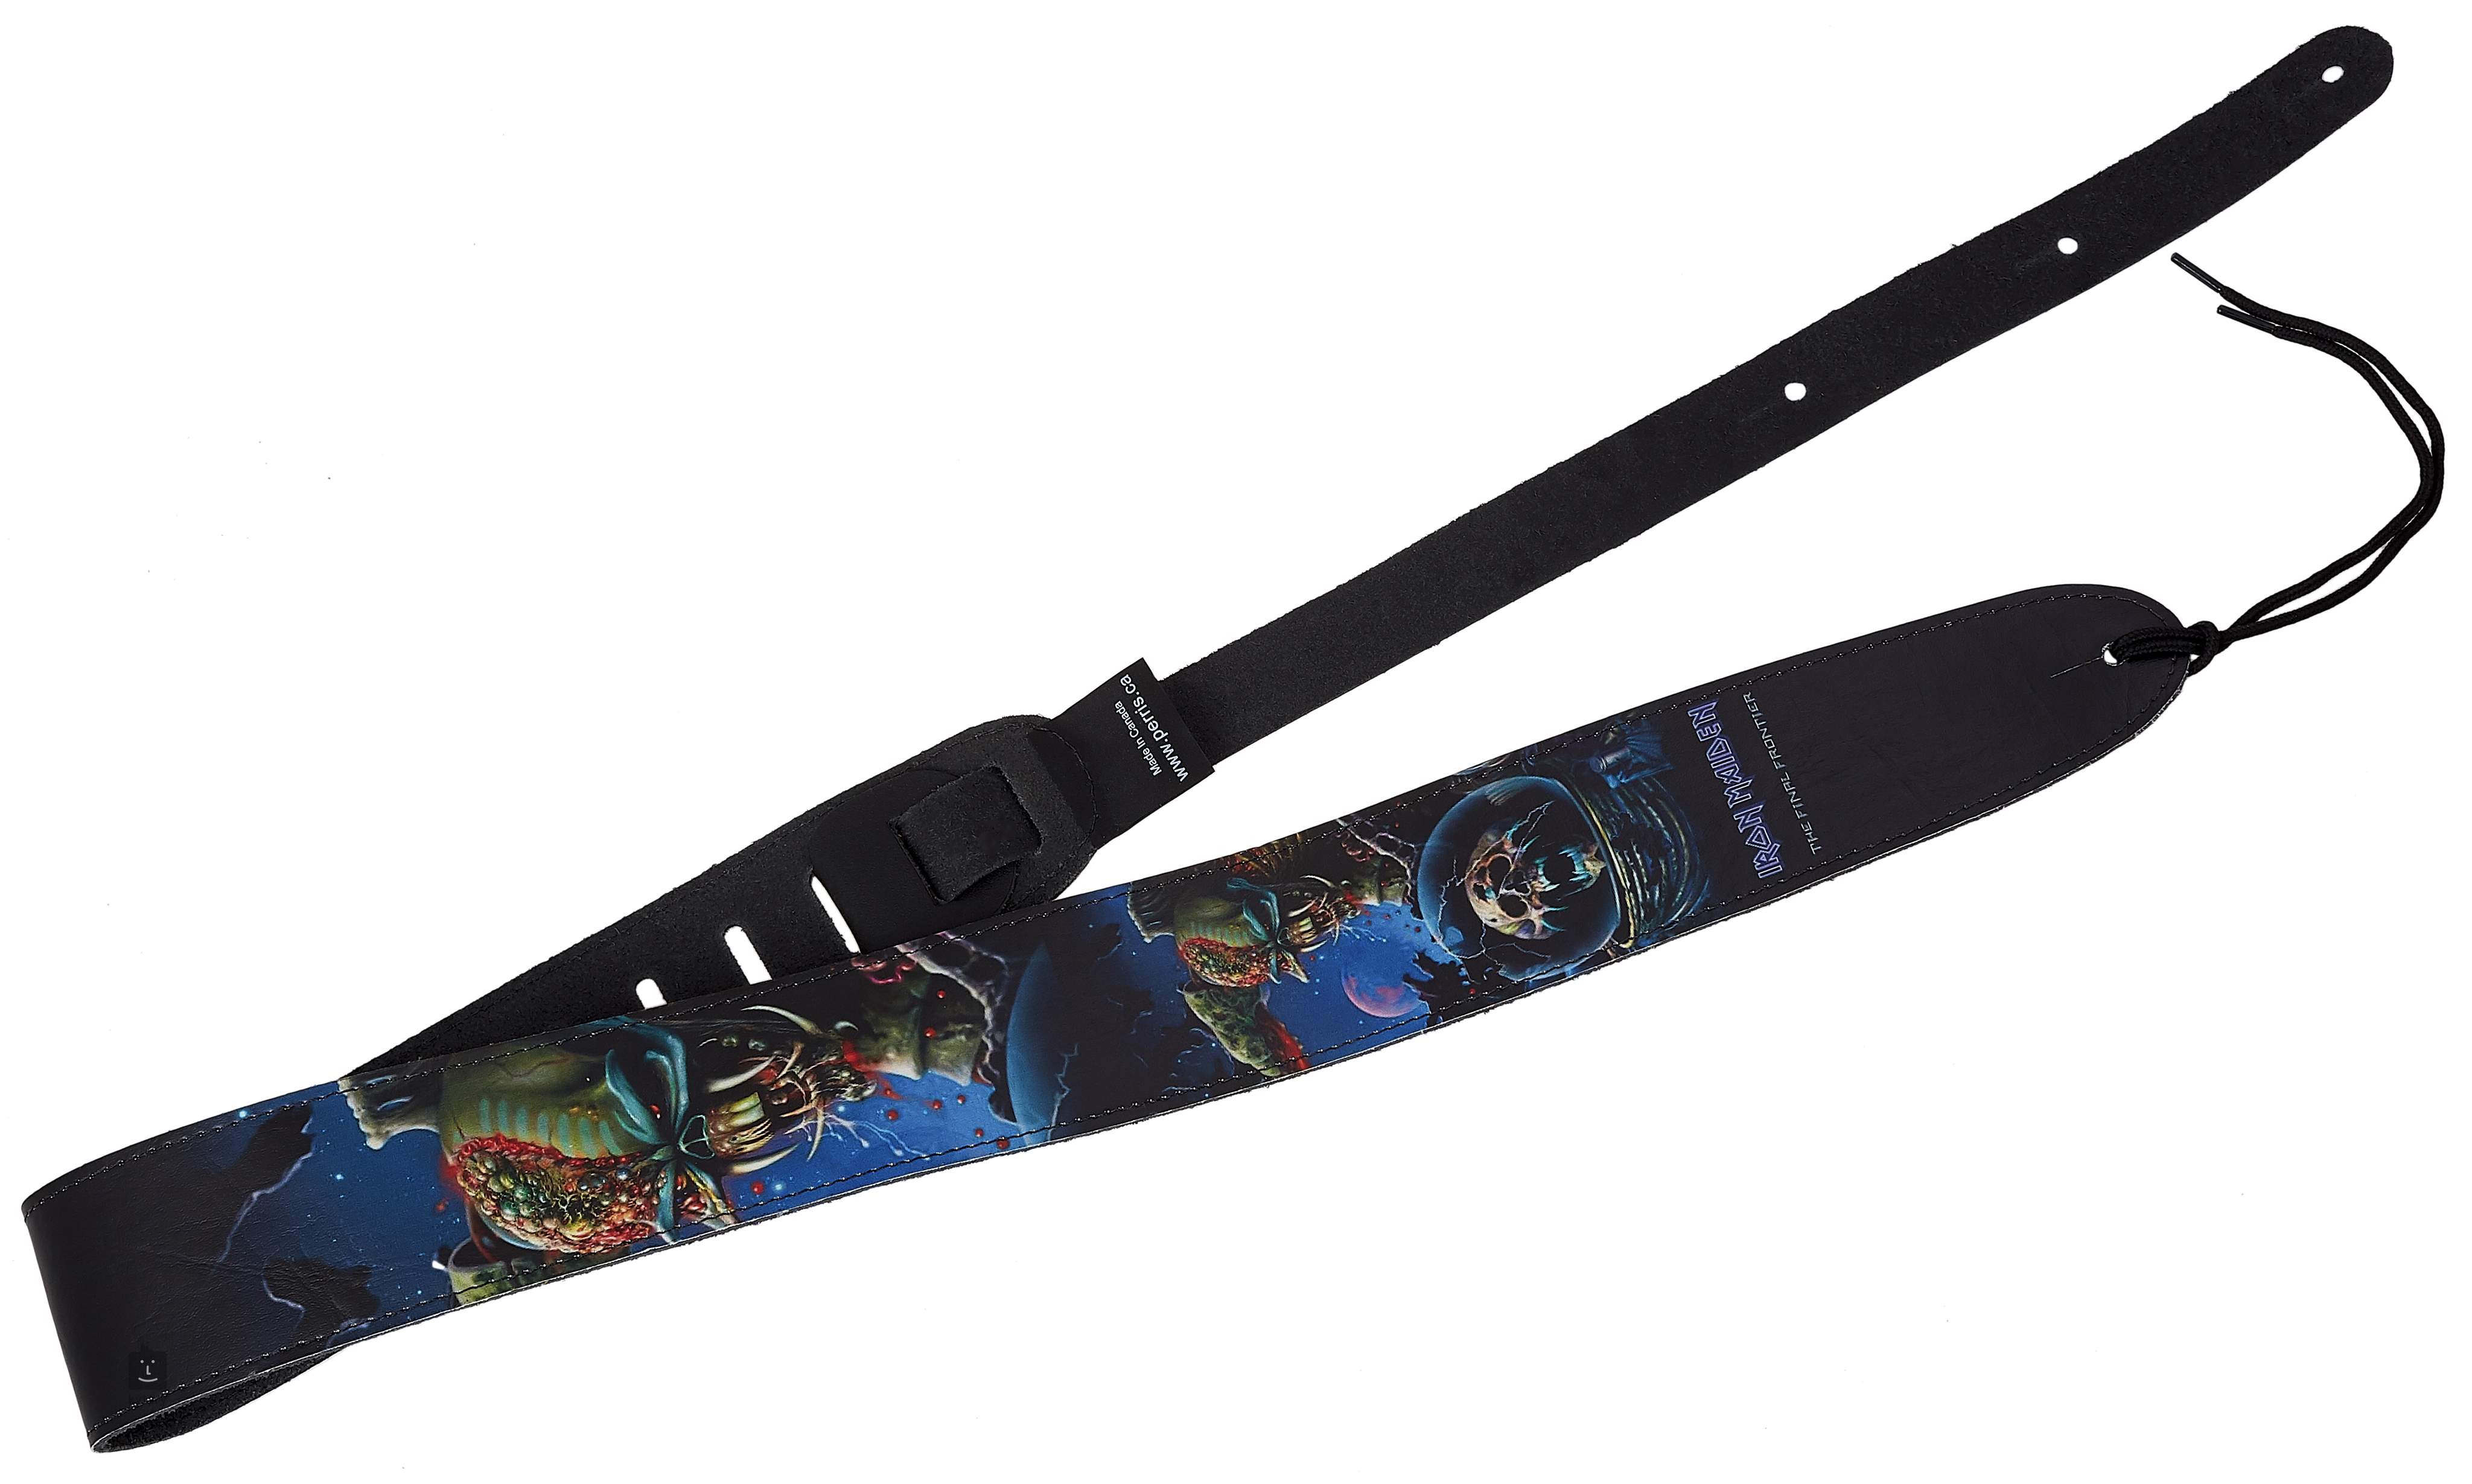 Perris Leathers P25INM-1333 Iron Maiden Leather Guitar Strap